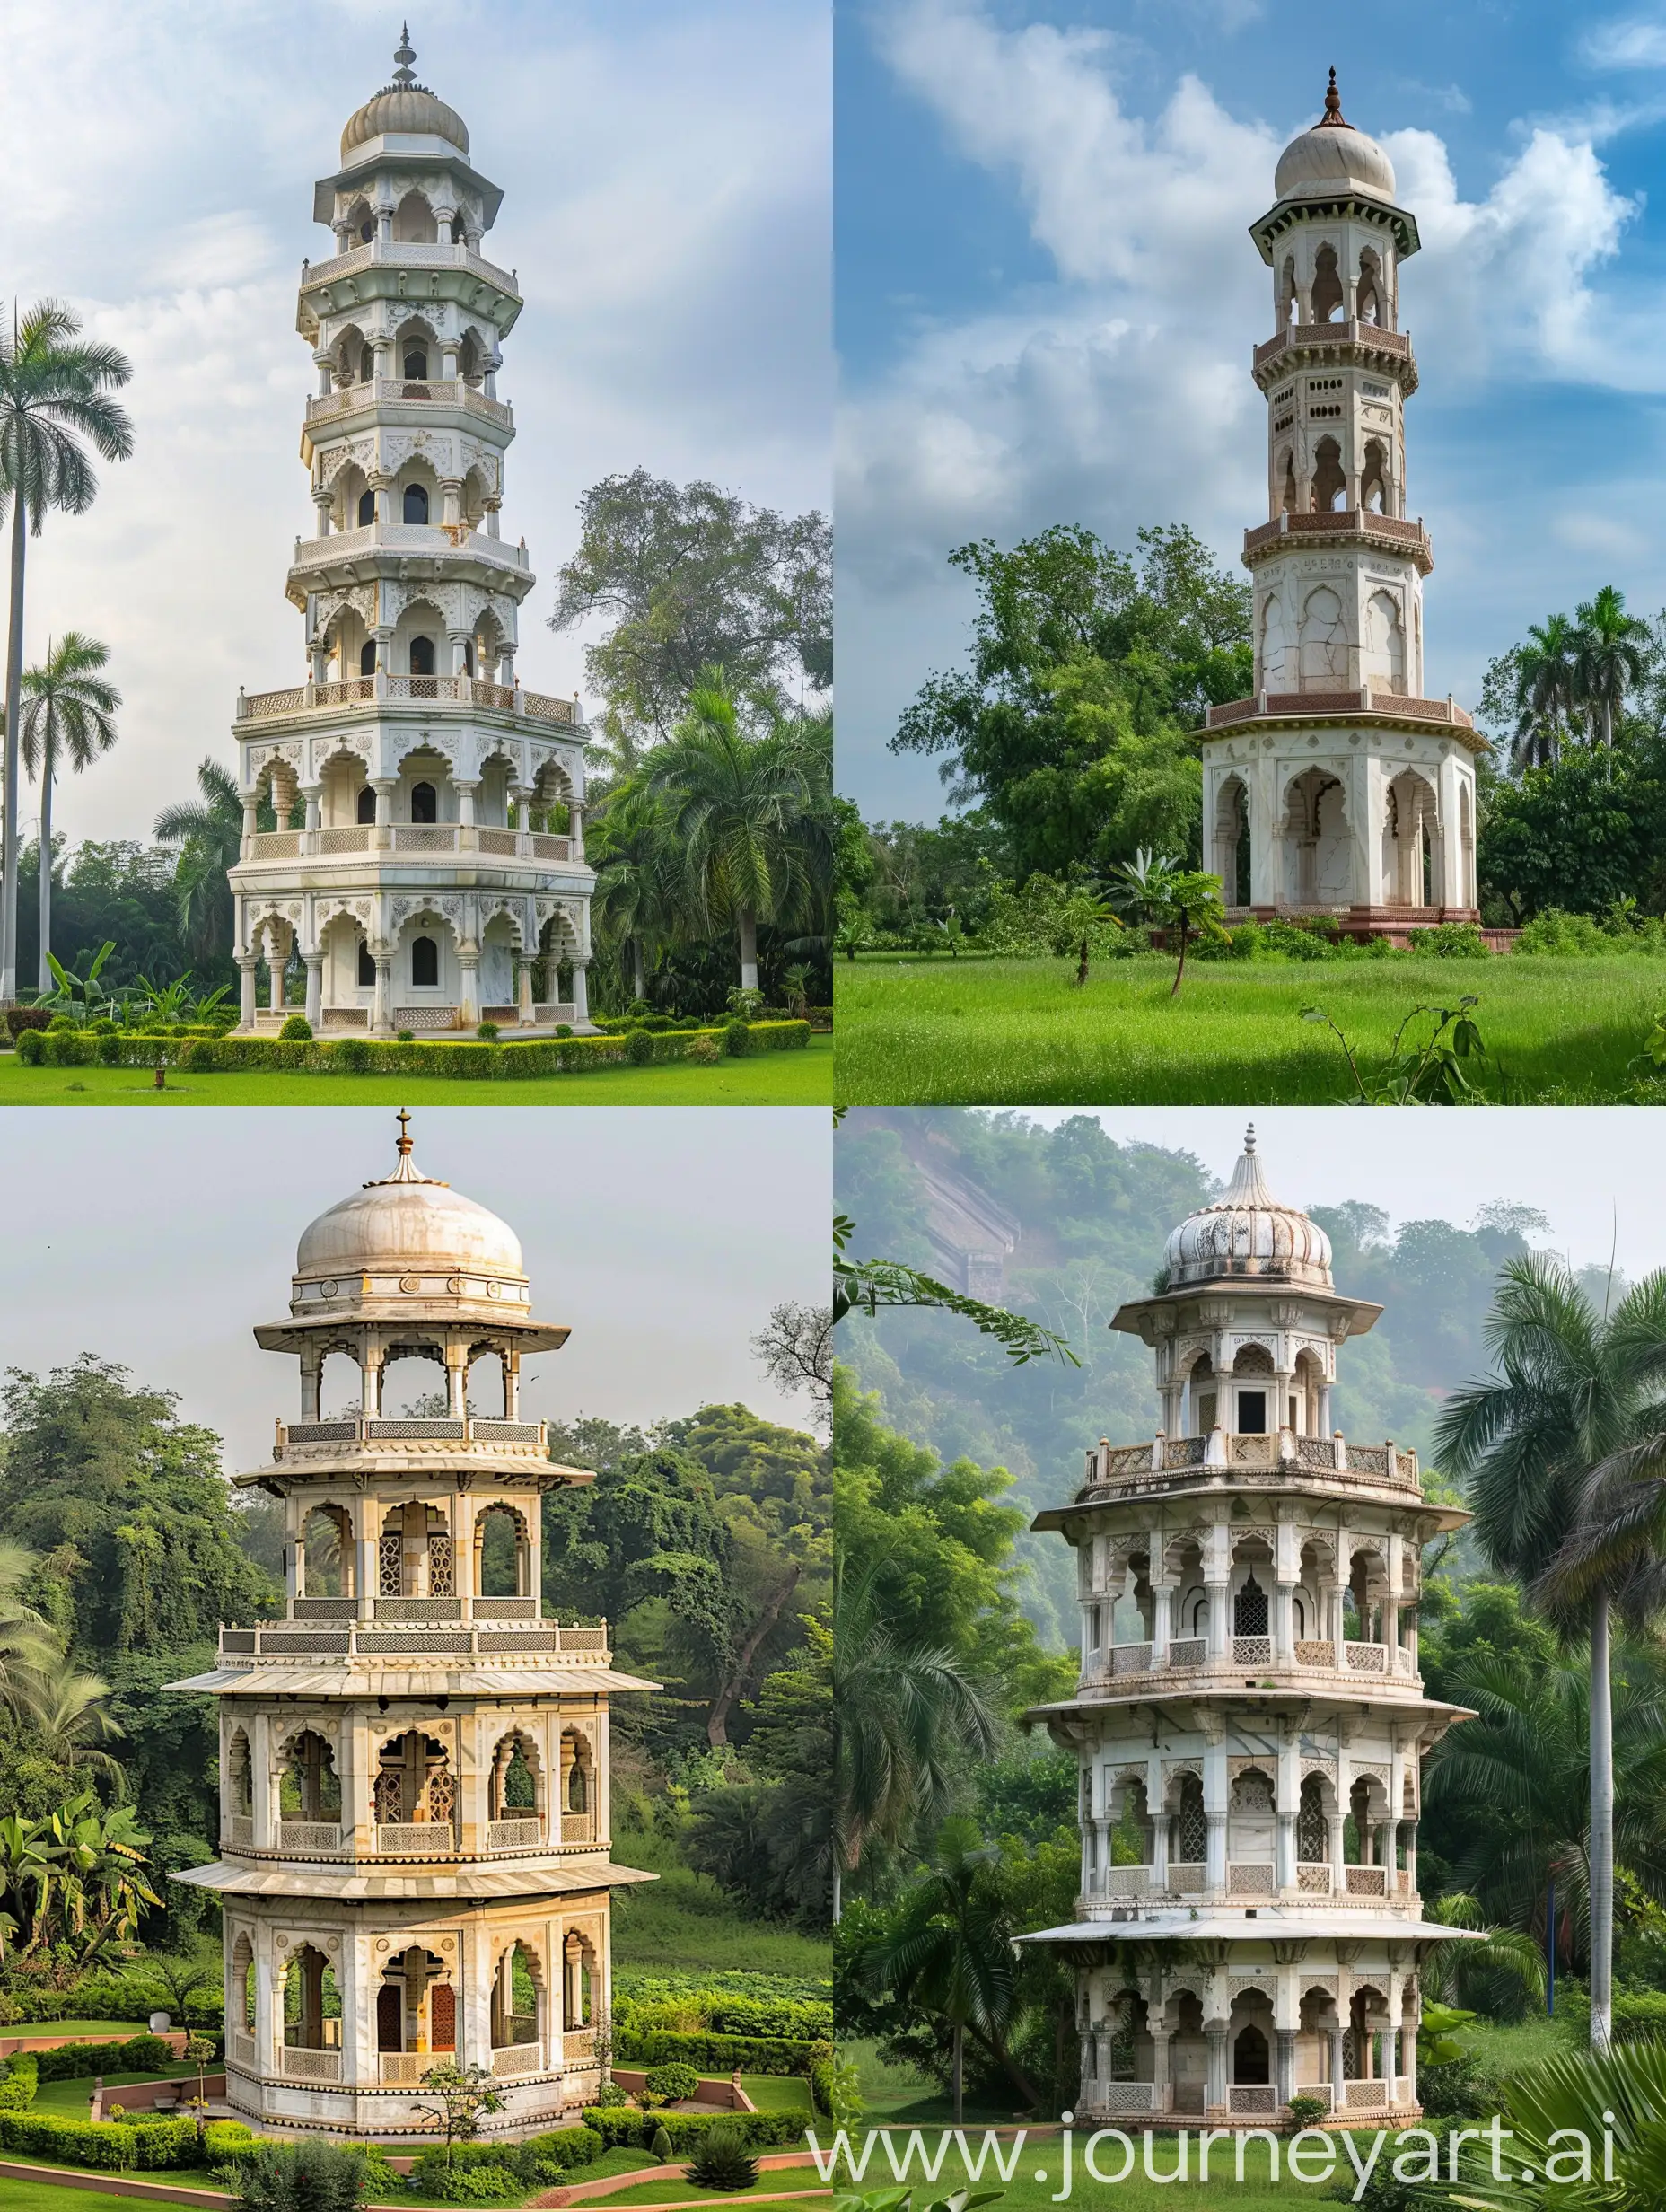 a multilevel Mughal minaret, large Mughal domed cupola at the top, Mughal arched windows, Mughal arches, White marbled having Mughal pietra dura decorations on spandrels, standing isolated in a lush green field --ar 3:4